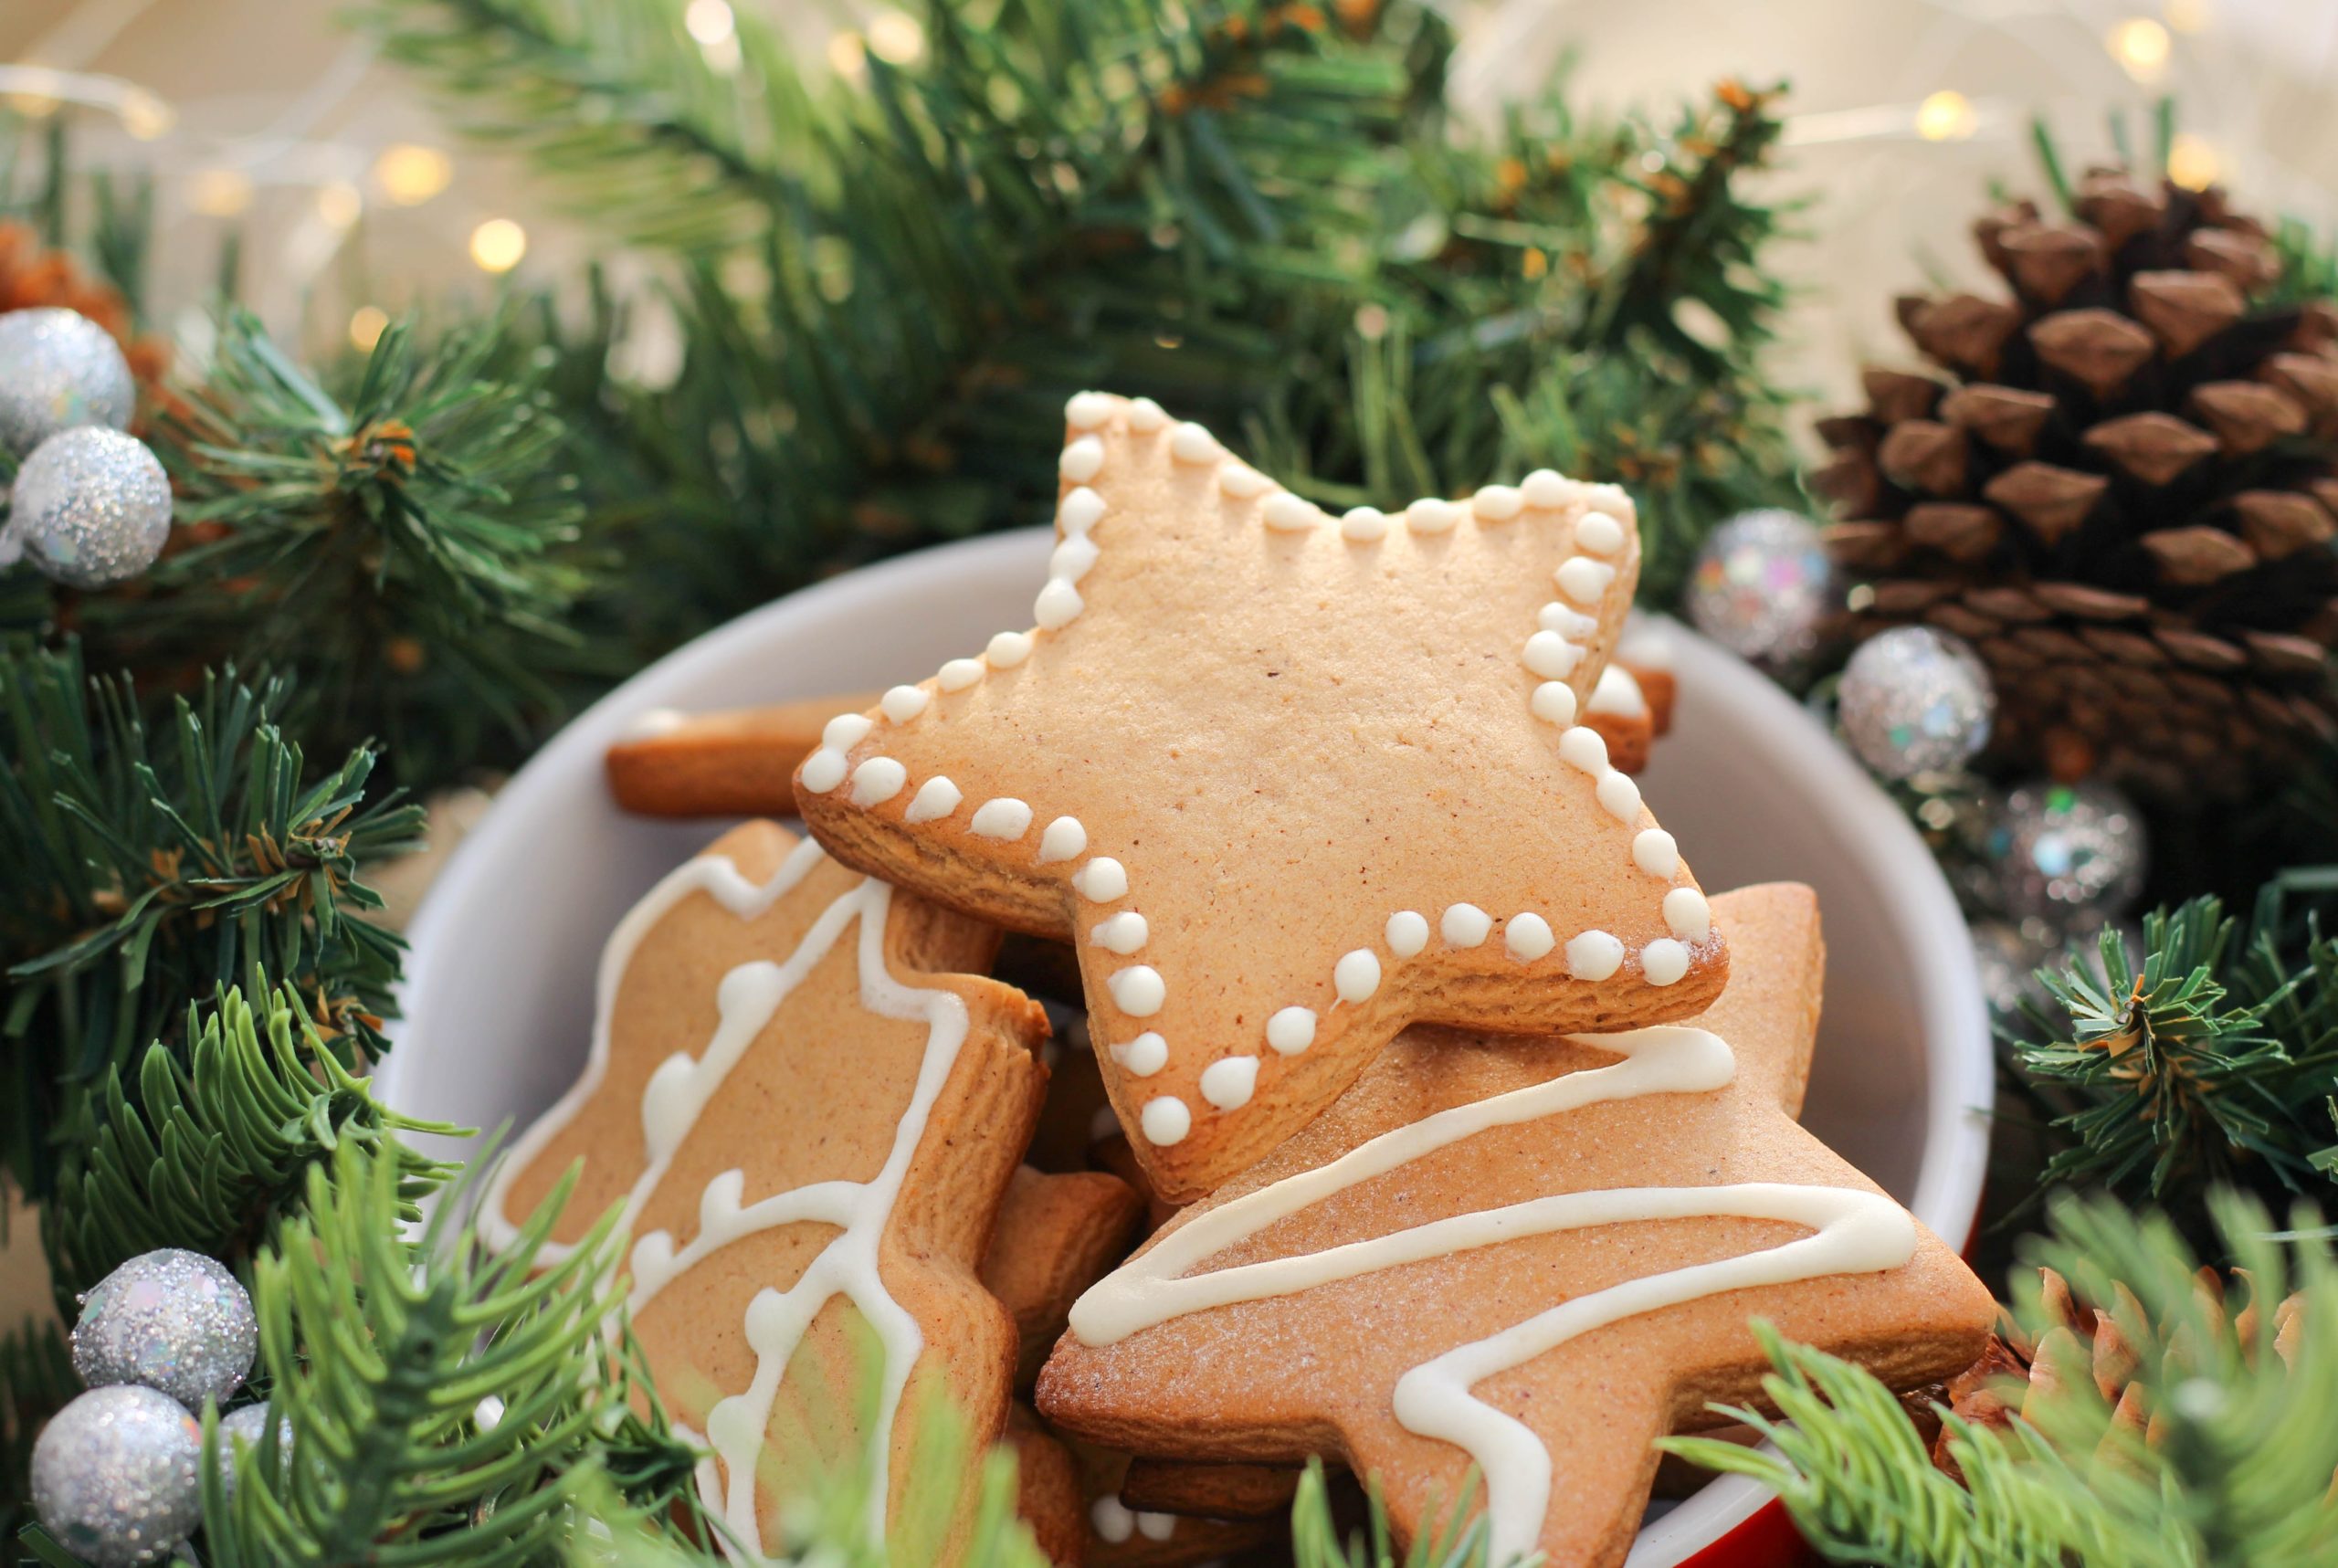 Christmas cookies in a bowl surrounded by Christmas greens, pinecones and silver decorations